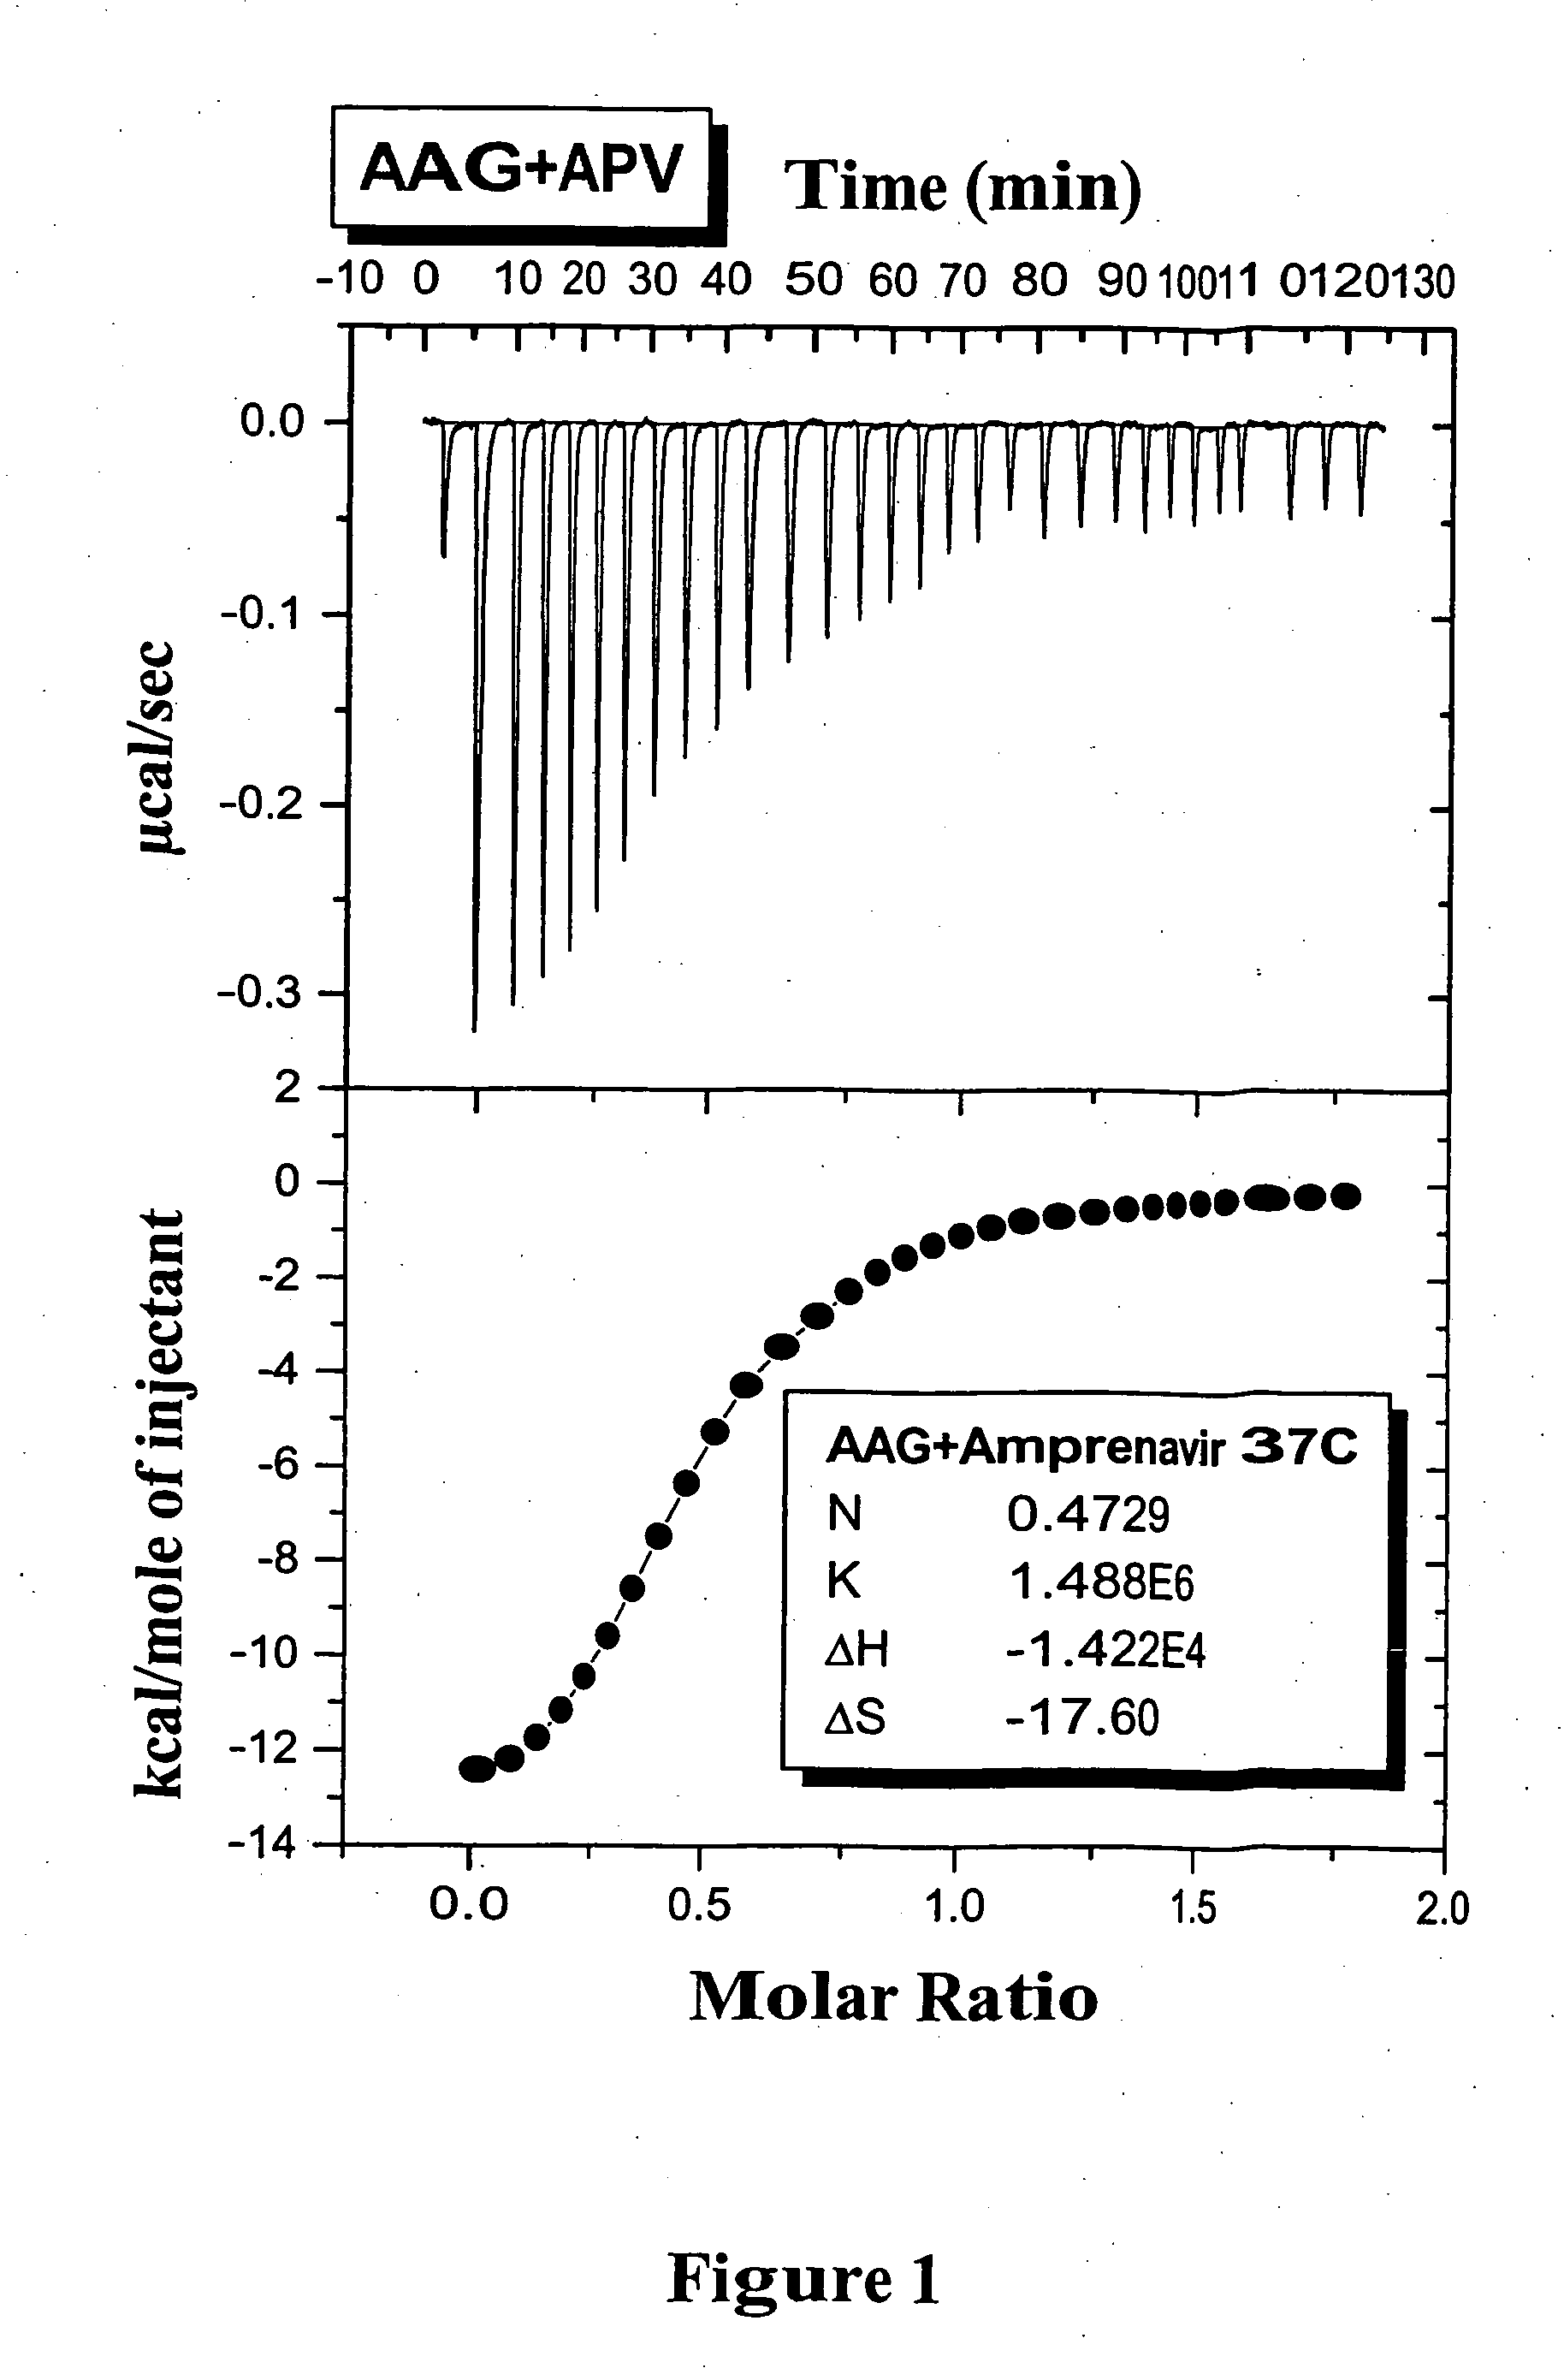 Methods for determining plasma free drug concentration by direct measurement of binding affinity of protease inhibitors to plasma proteins